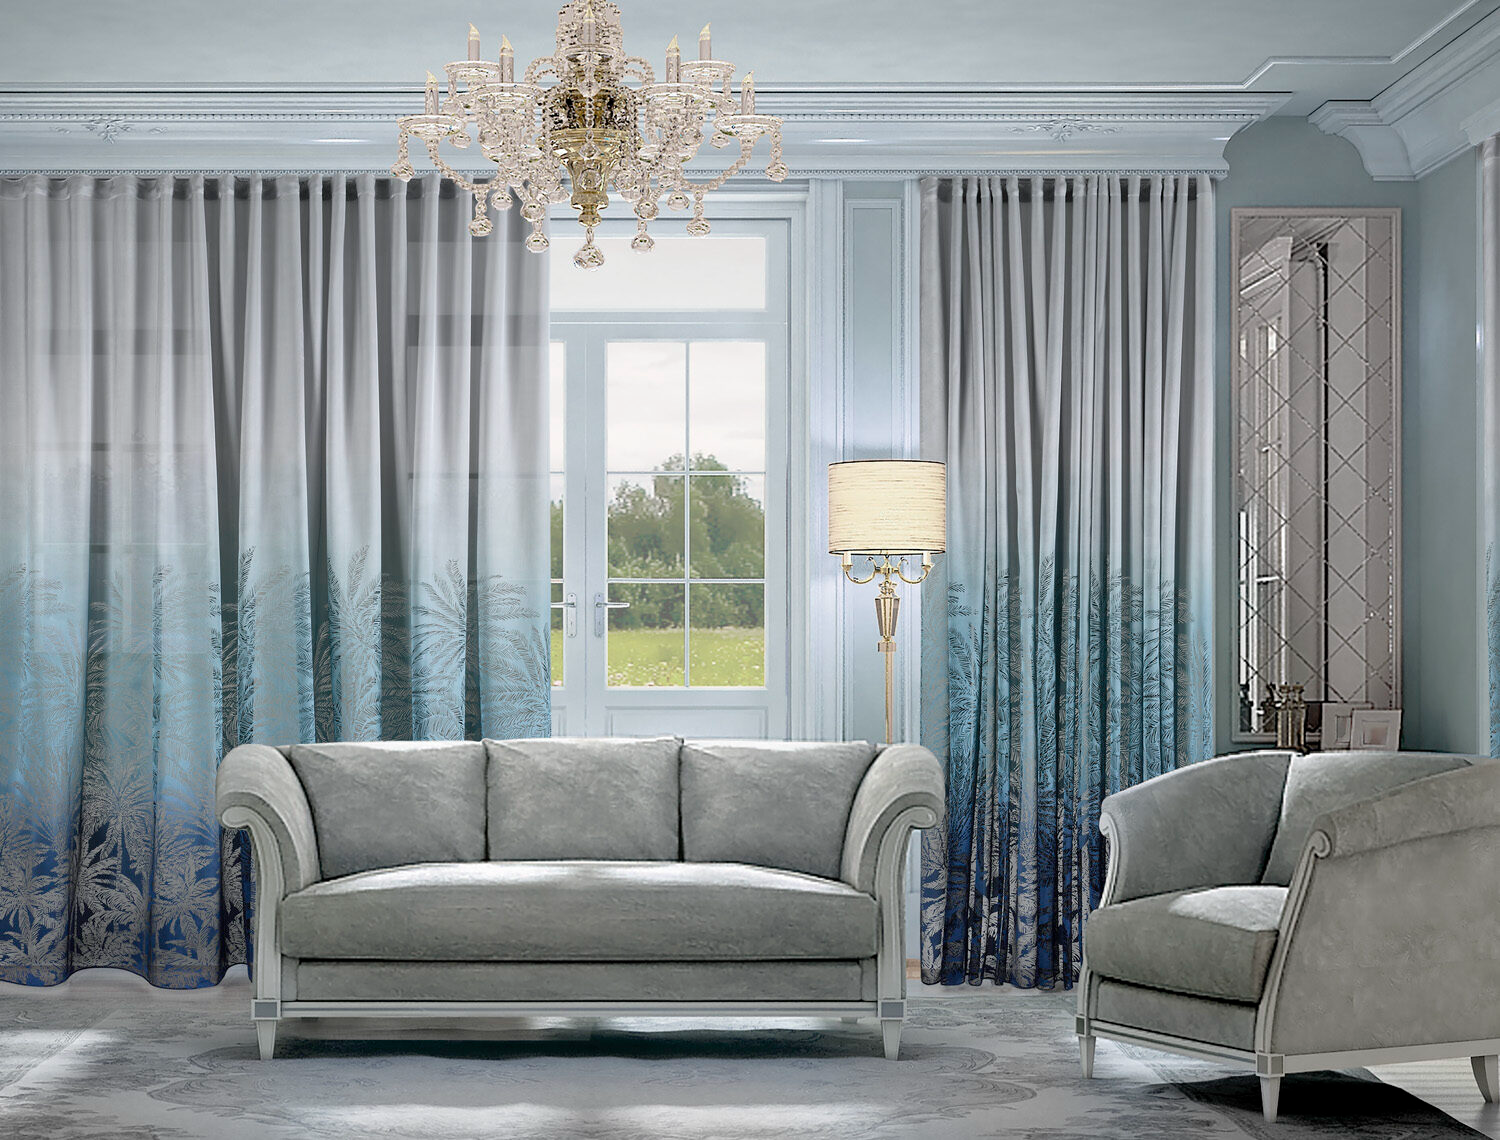 Inspiring Ideas For Your Room’s Curtains